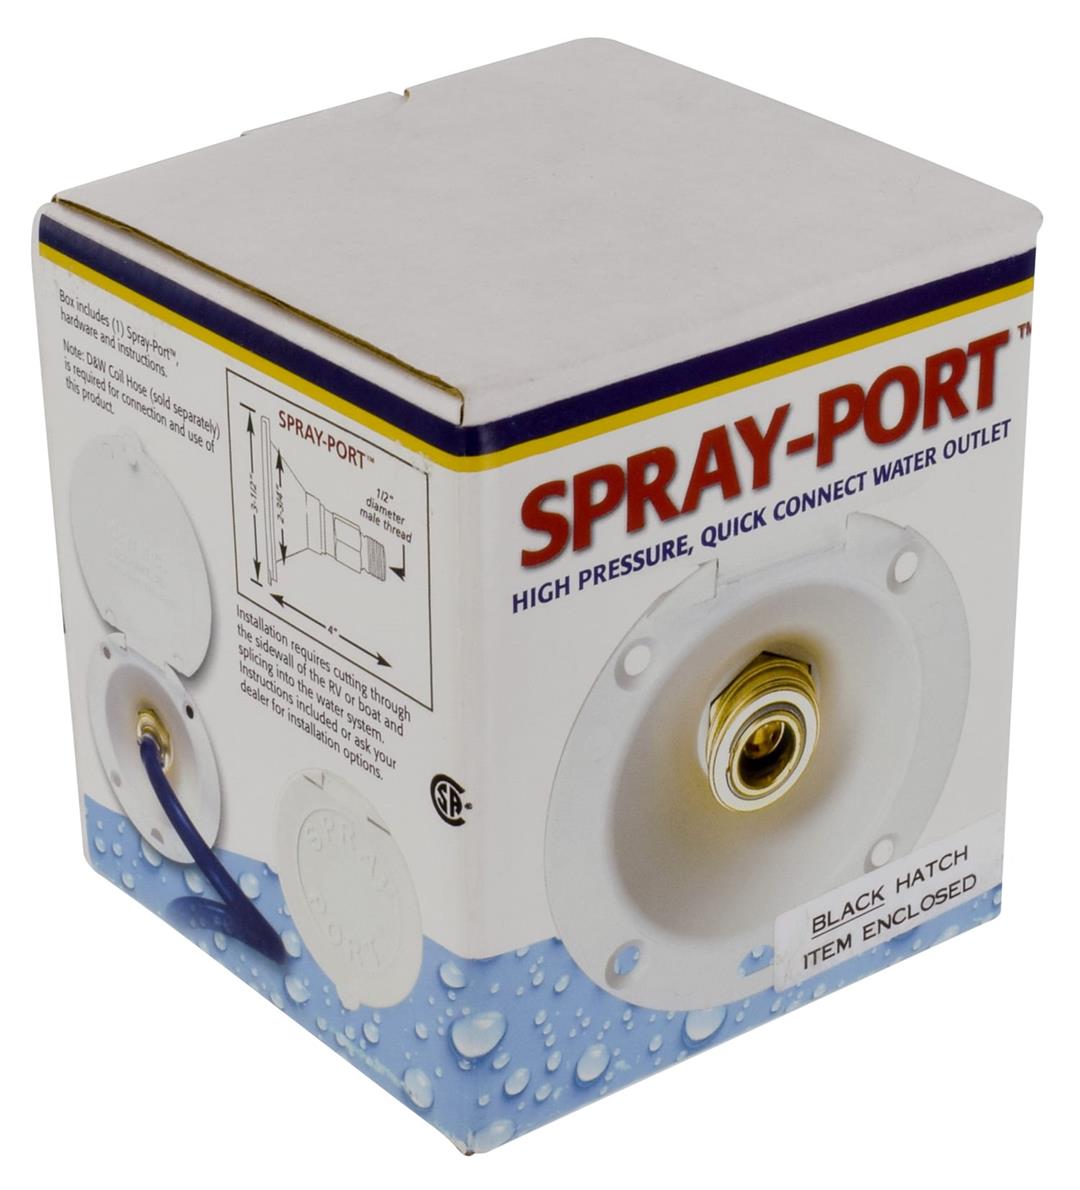 Phoenix Products Spray-Away ™ Quick Connect Exterior Spray Port